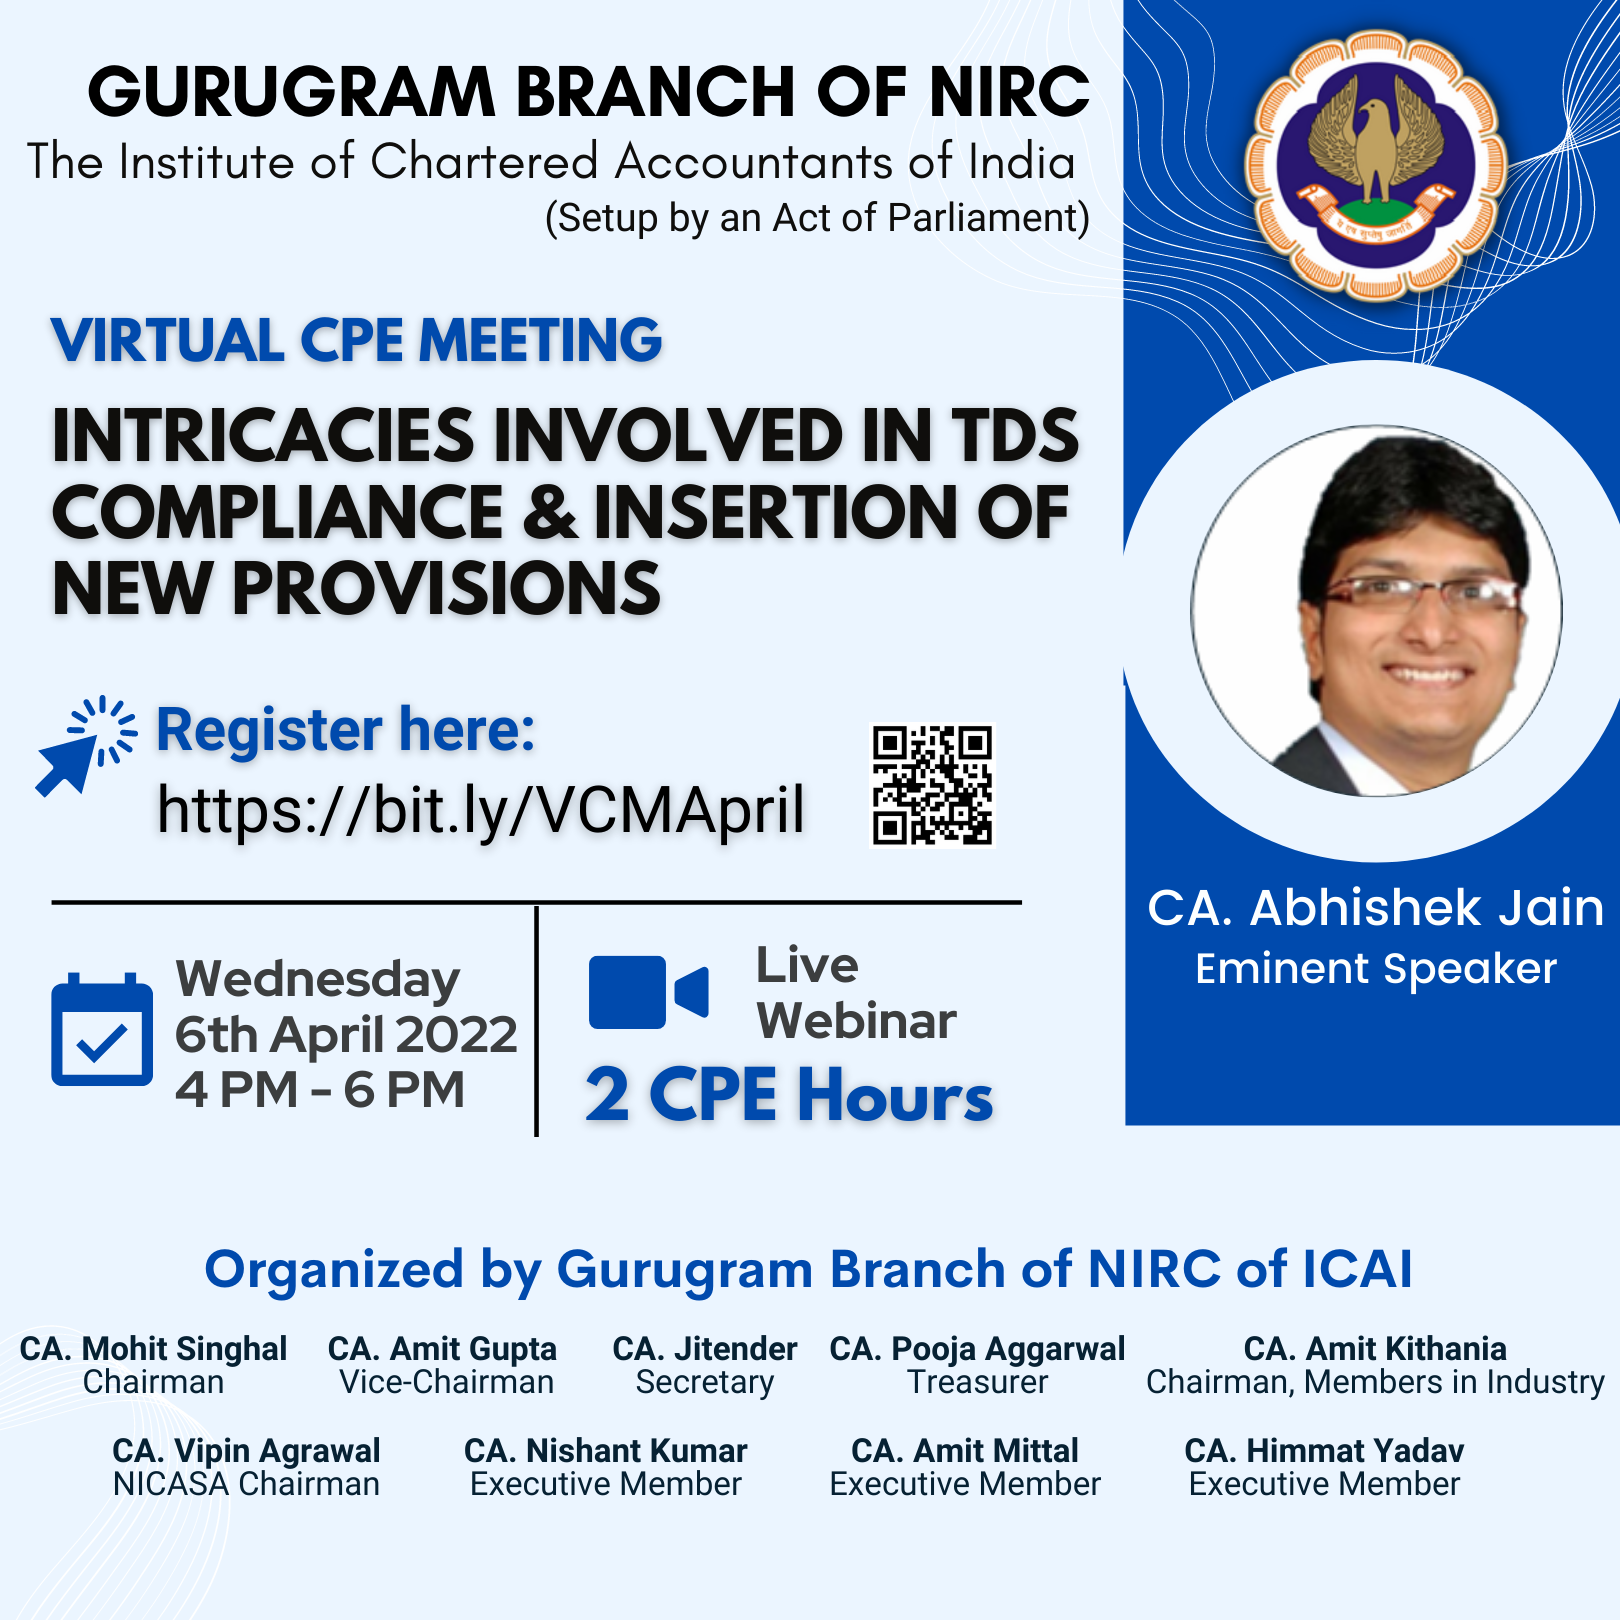 Virtual CPE Meeting on Intricacies involved in TDS Compliance & insertion of new provisions